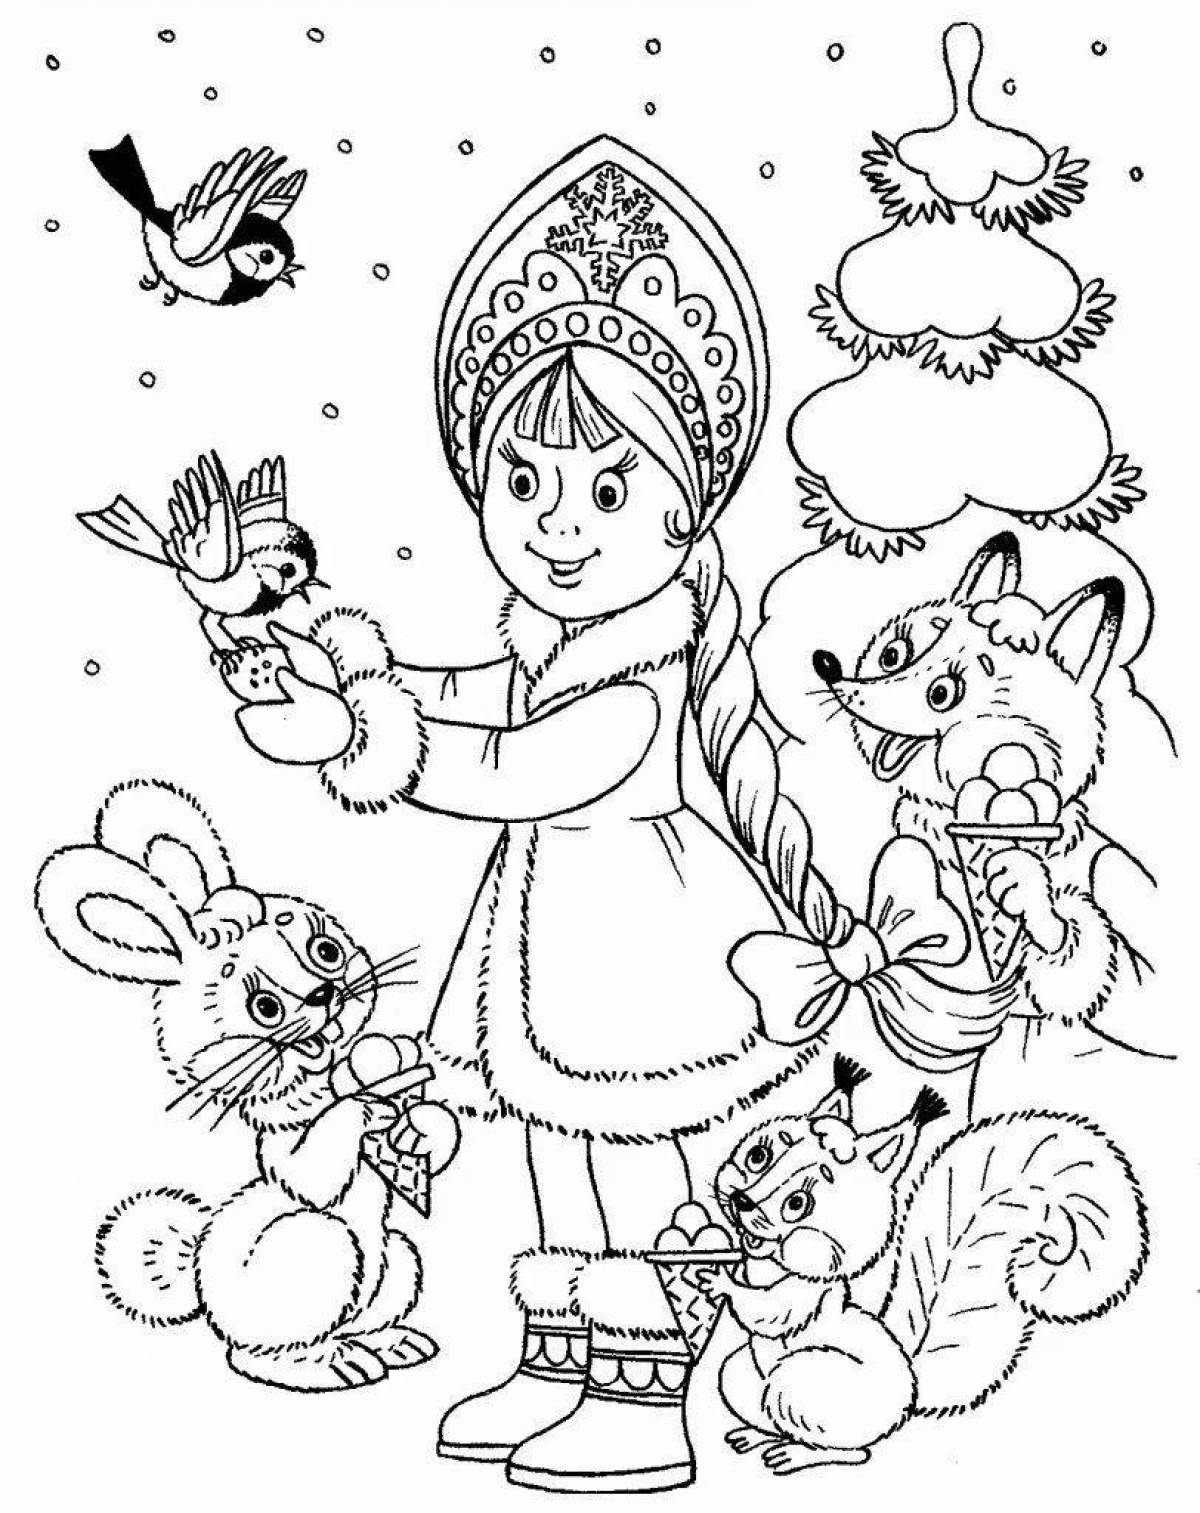 Alive santa claus and animals coloring book